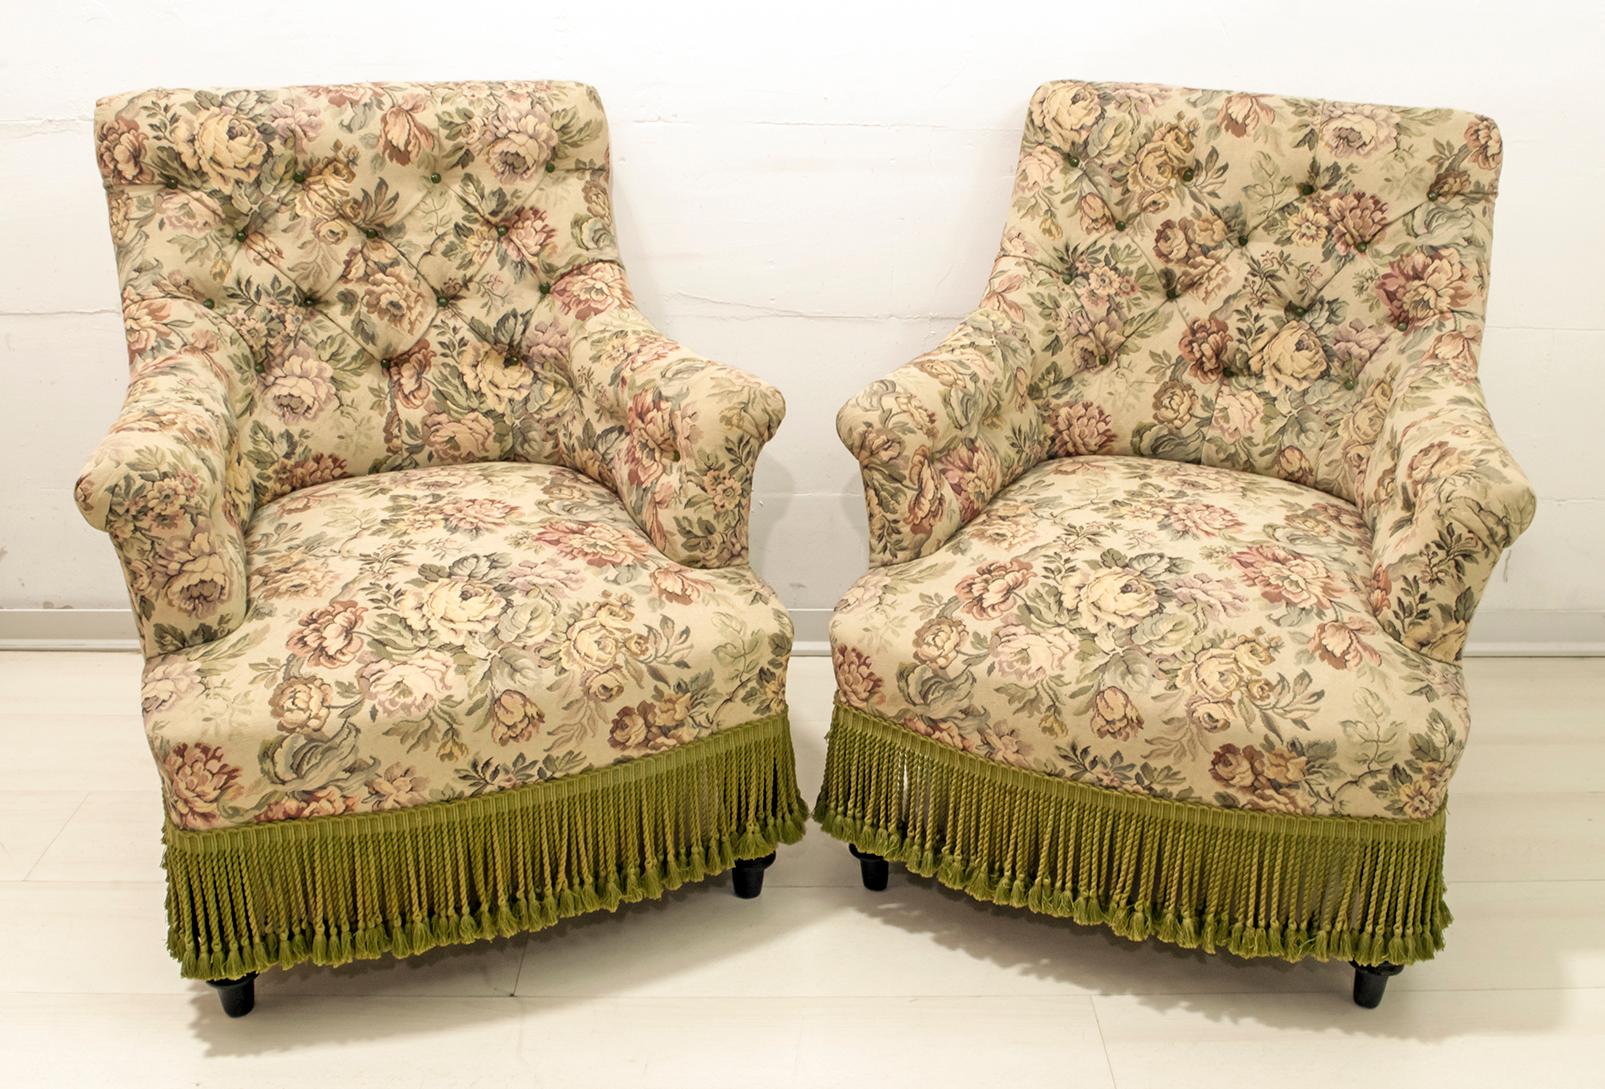 Sofa and two armchairs from the 19th century, Napoleon III period, original Gobelin upholstery, normal wear but in excellent condition. France, 1870

Armchair sizes:
H cm 80 x W cm 70 x D cm 72 x SH cm 40.
 